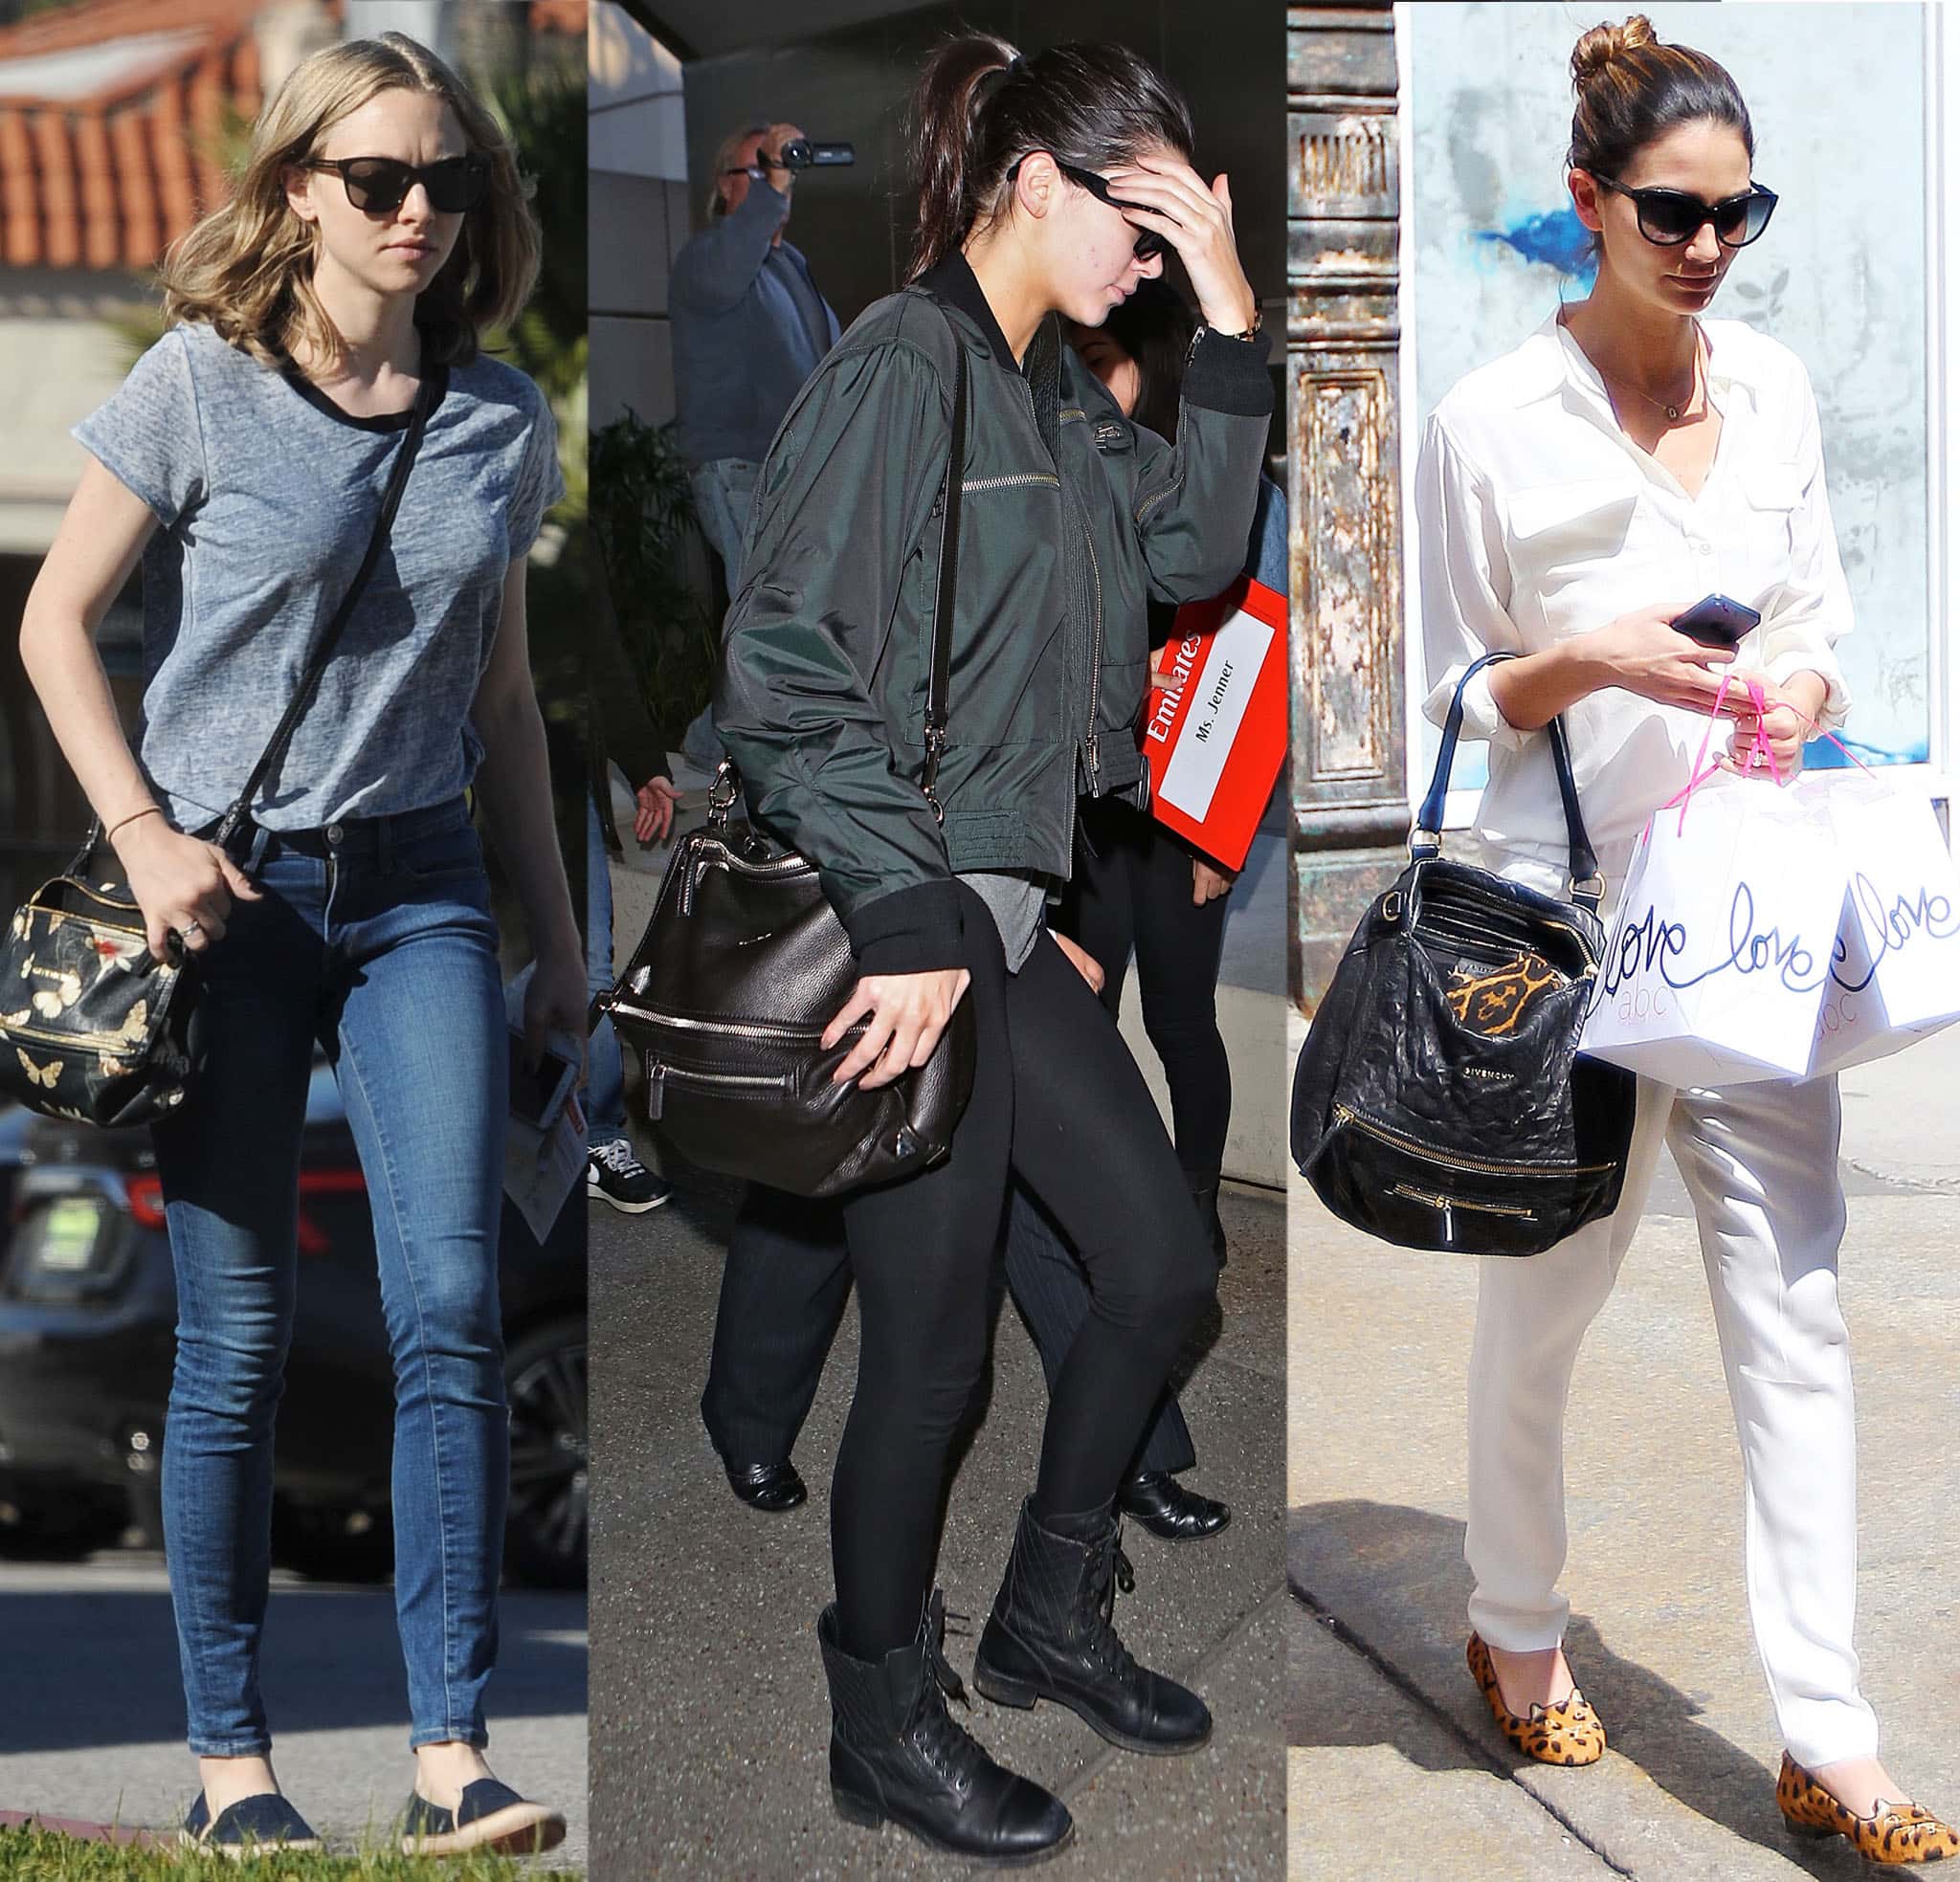 Amanda Seyfried, Kendall Jenner, and Lily Aldridge carrying different styles of the Givenchy Pandora bag